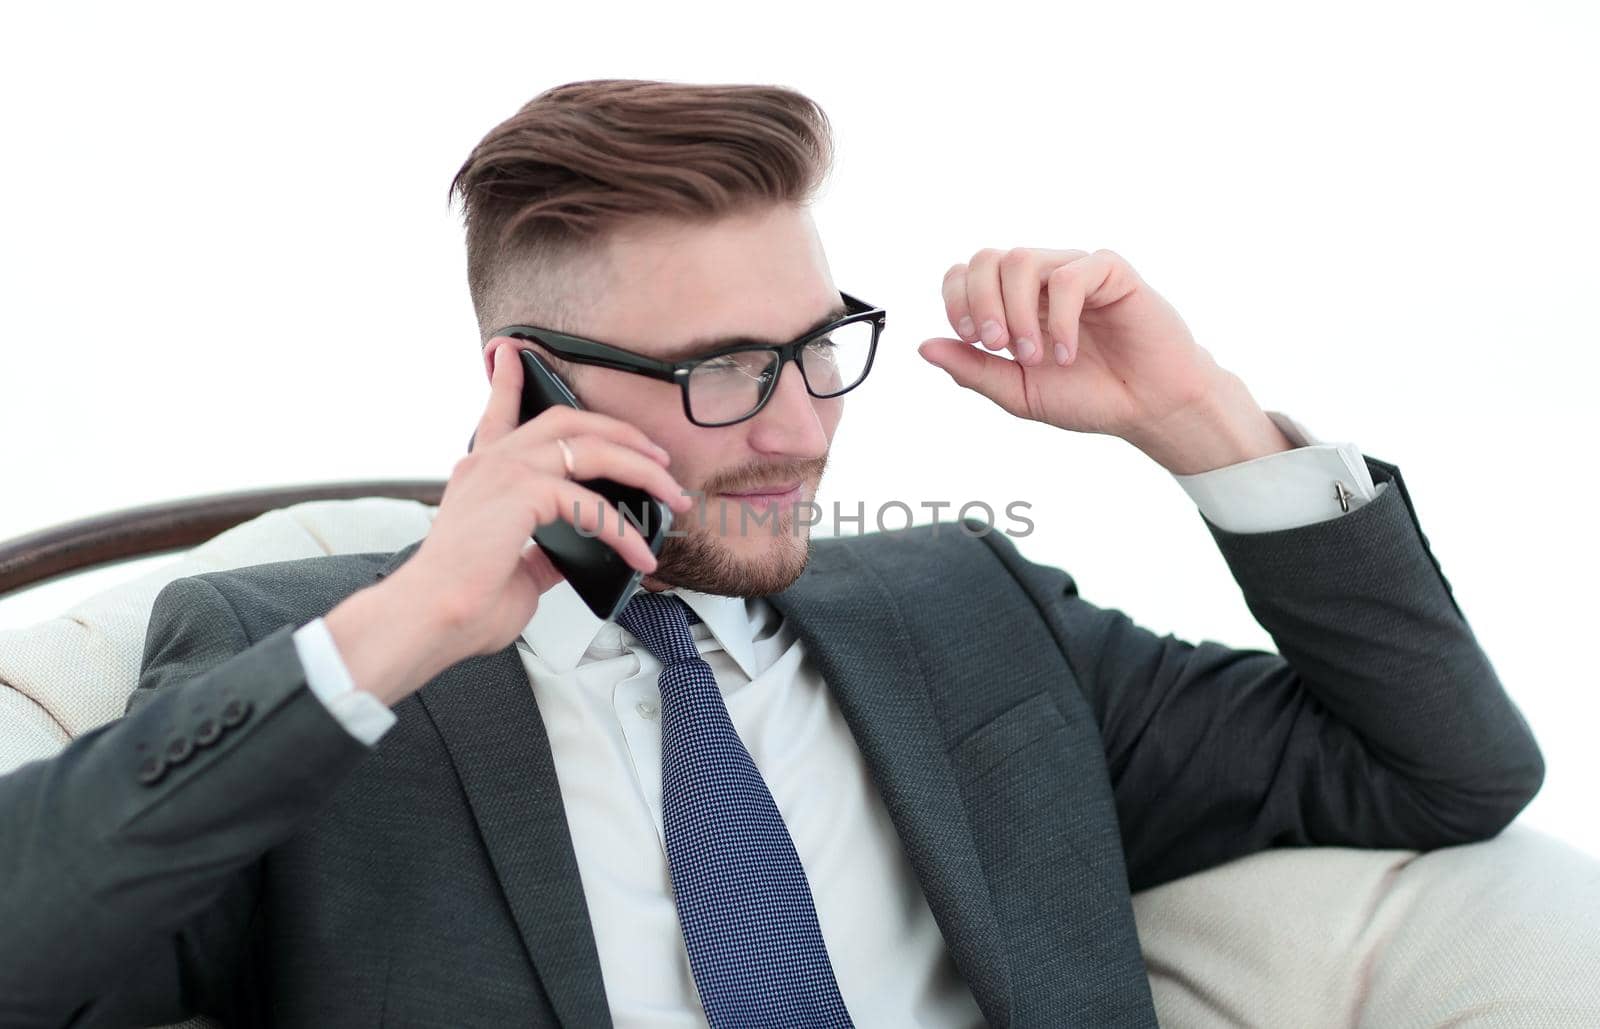 businessman listening to the interlocutor on a mobile phone.photo with text space